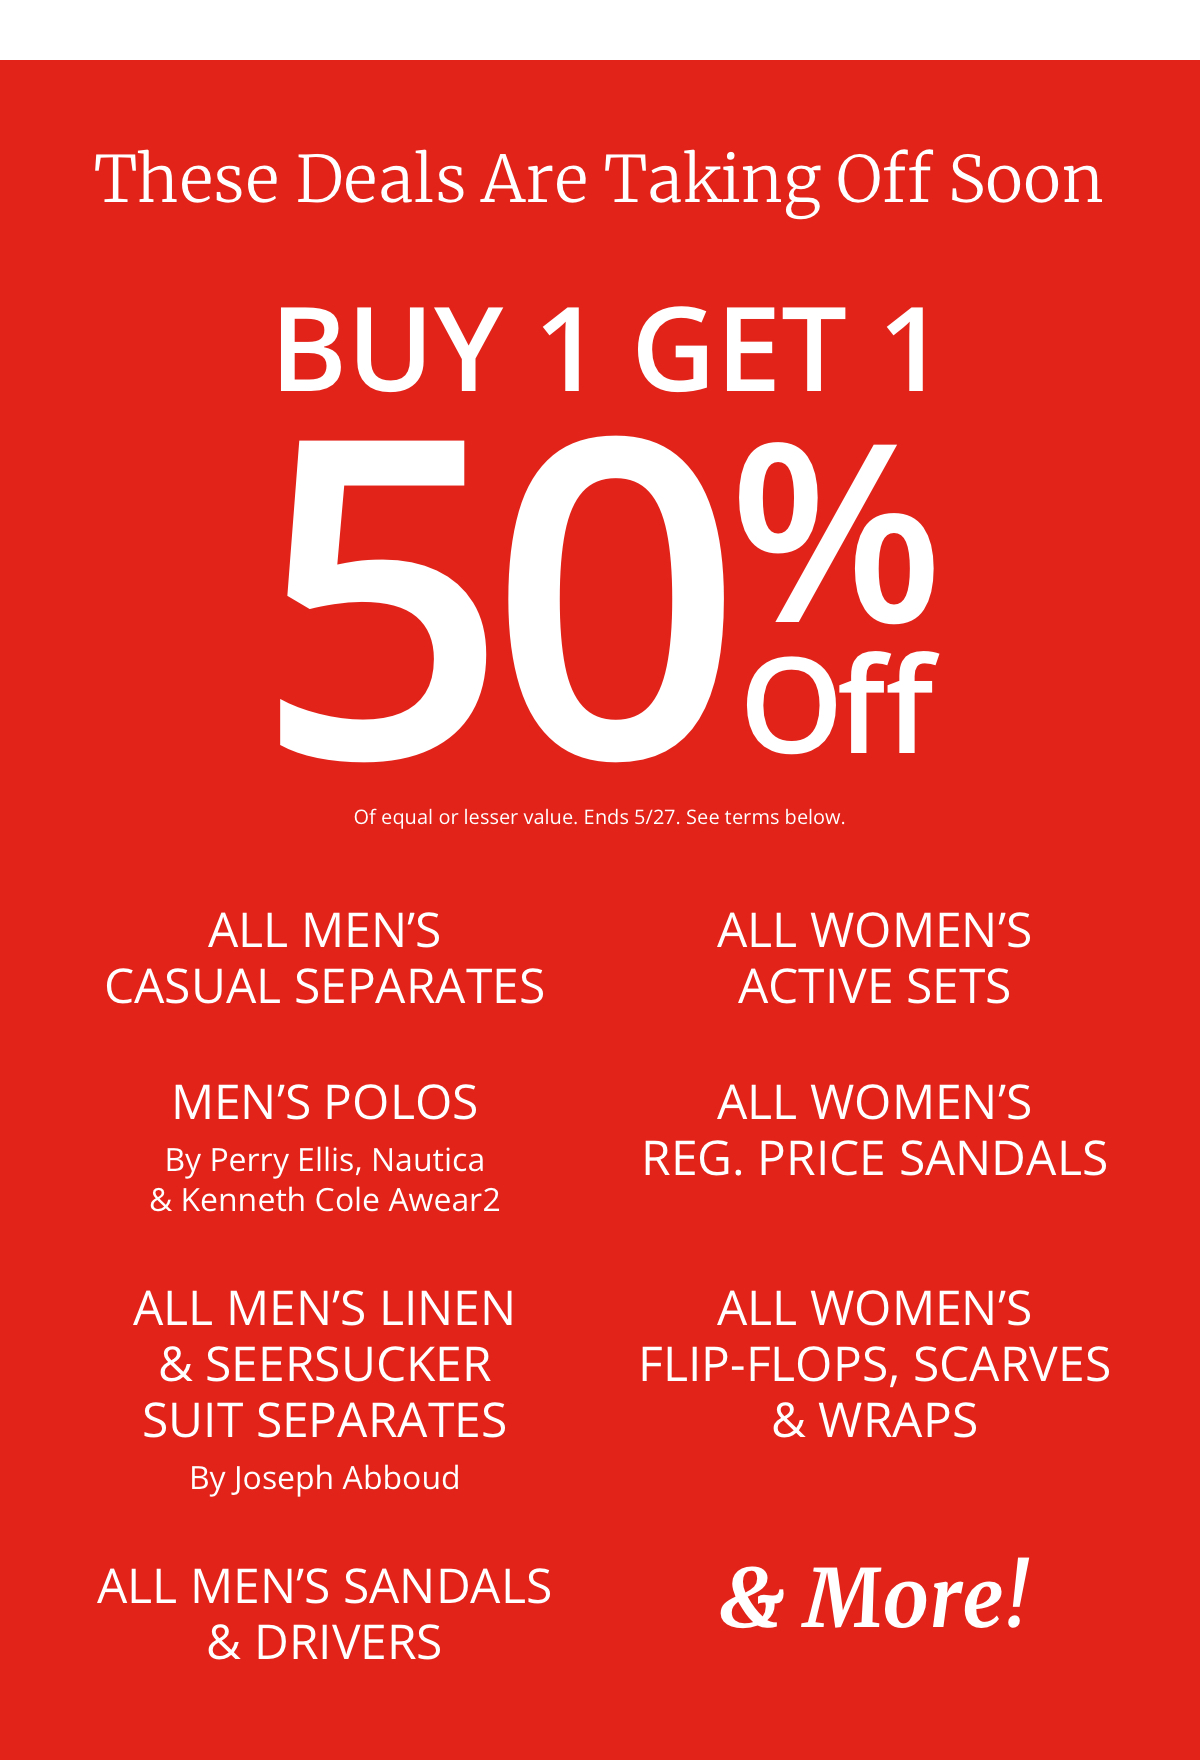 These Deals Are Taking Off Soon|Buy 1 Get 1| 50% Off|Of equal or lesser value|All Mens |Casual Separates|Mens Polos|By Perry Ellis, Nautica| and Kenneth Cole Awear2|All Mens Linen| and Seersucker|Suit Separates|By Joseph Abboud|All Mens Sandals and Drivers|All Womens| Active Sets|All Womens| Reg. Price Sandals|All Womens| Flip-Flops, Scarves |and Wraps|and More!